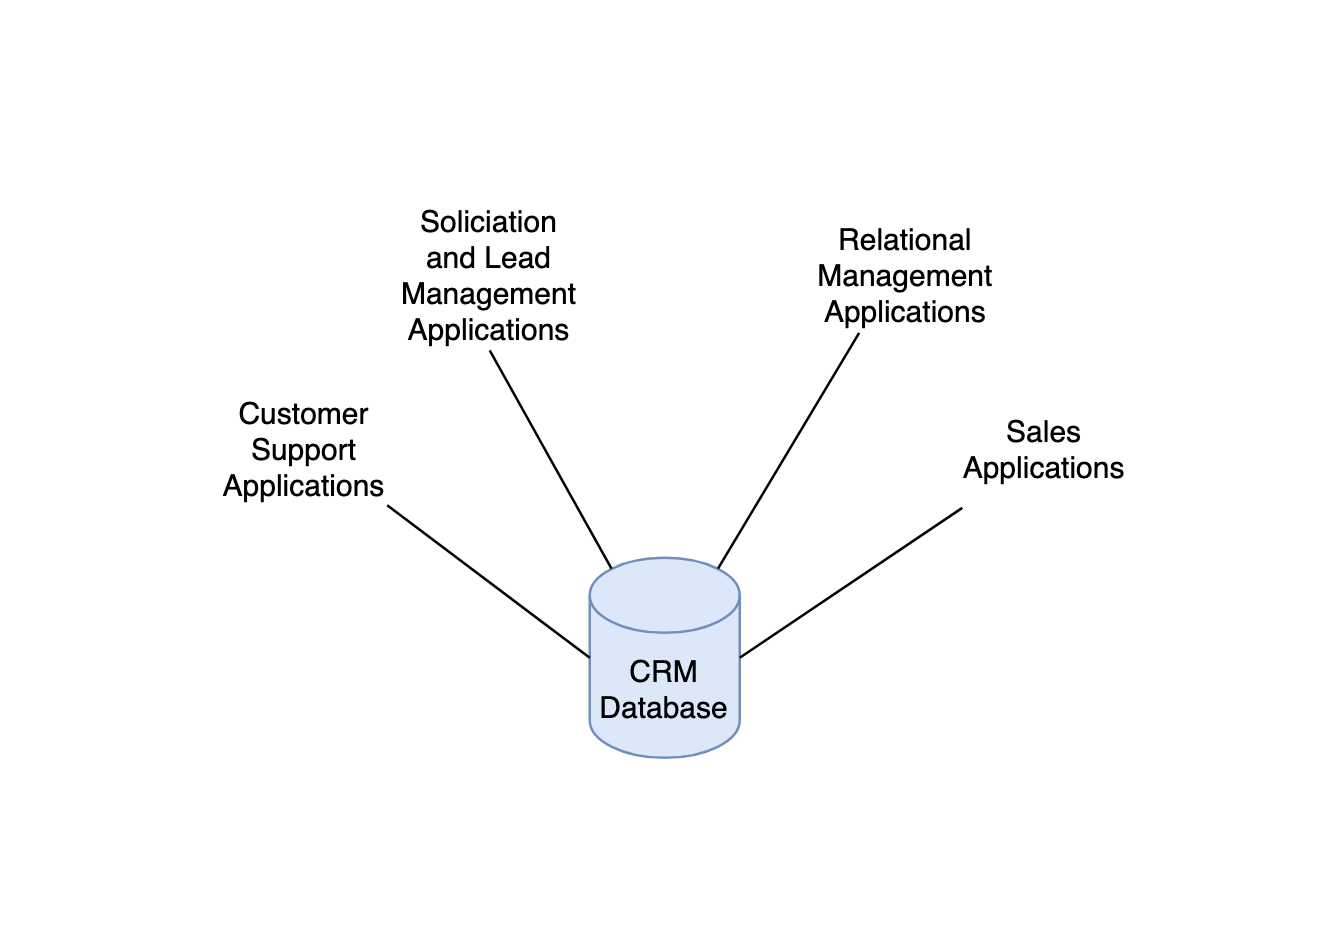 The CRM Databases stored applications